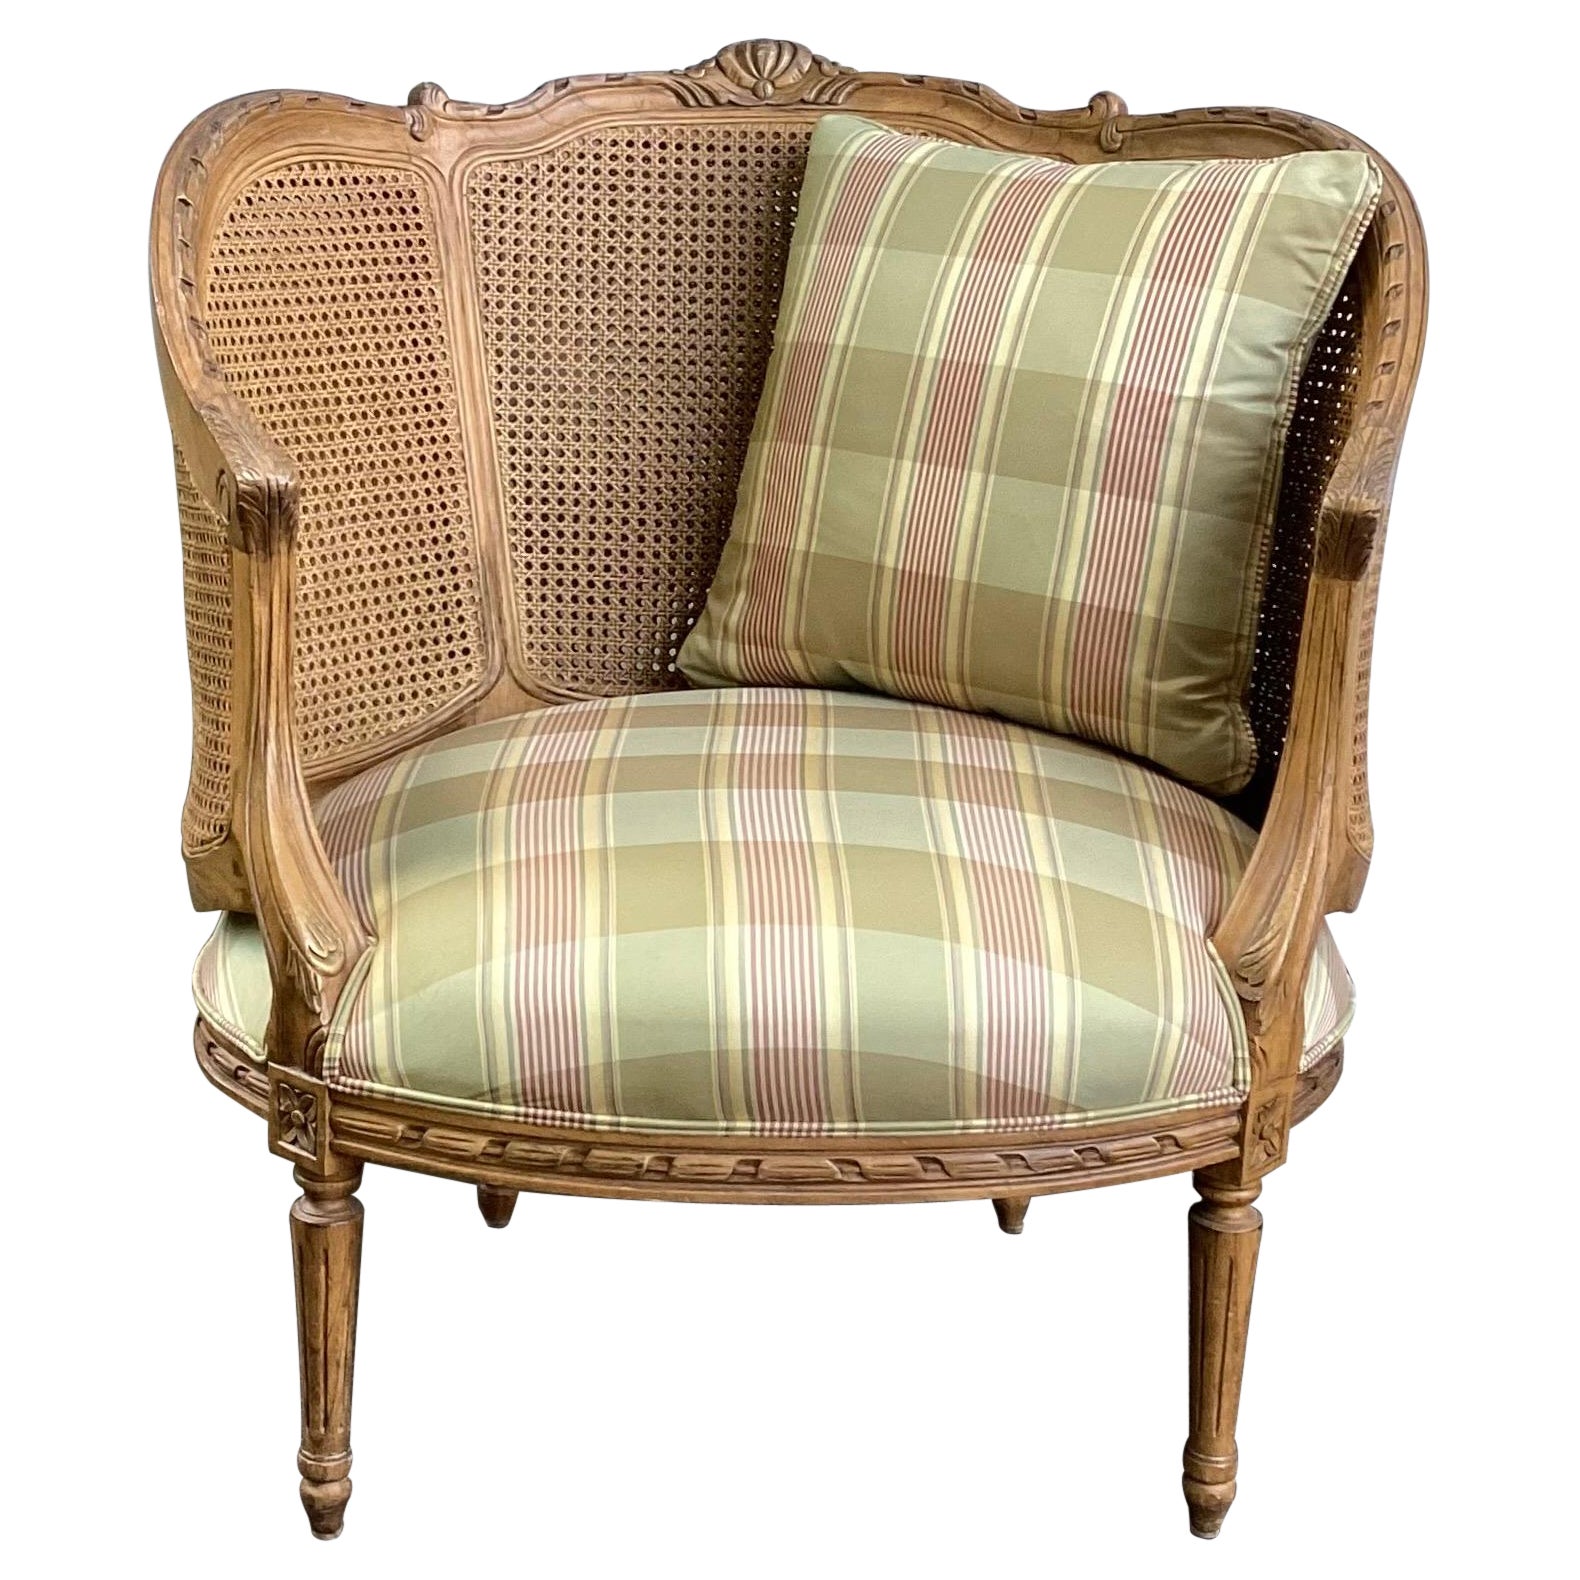 French Louis XVI Style Barrel Chair with Caning